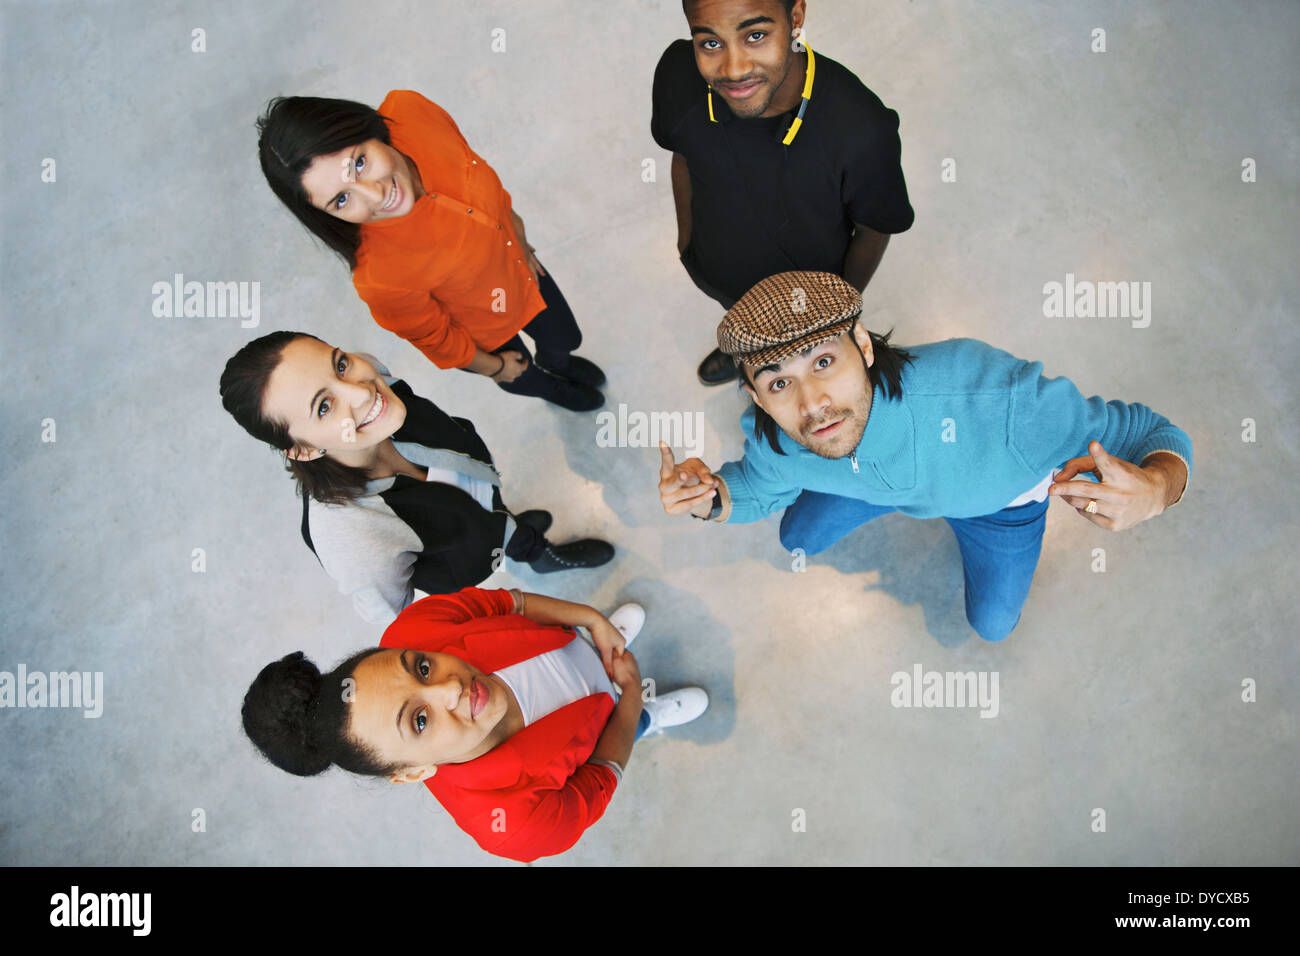 Overhead view of young people standing together looking up at camera with stylish young man gesturing. Team or group. Stock Photo